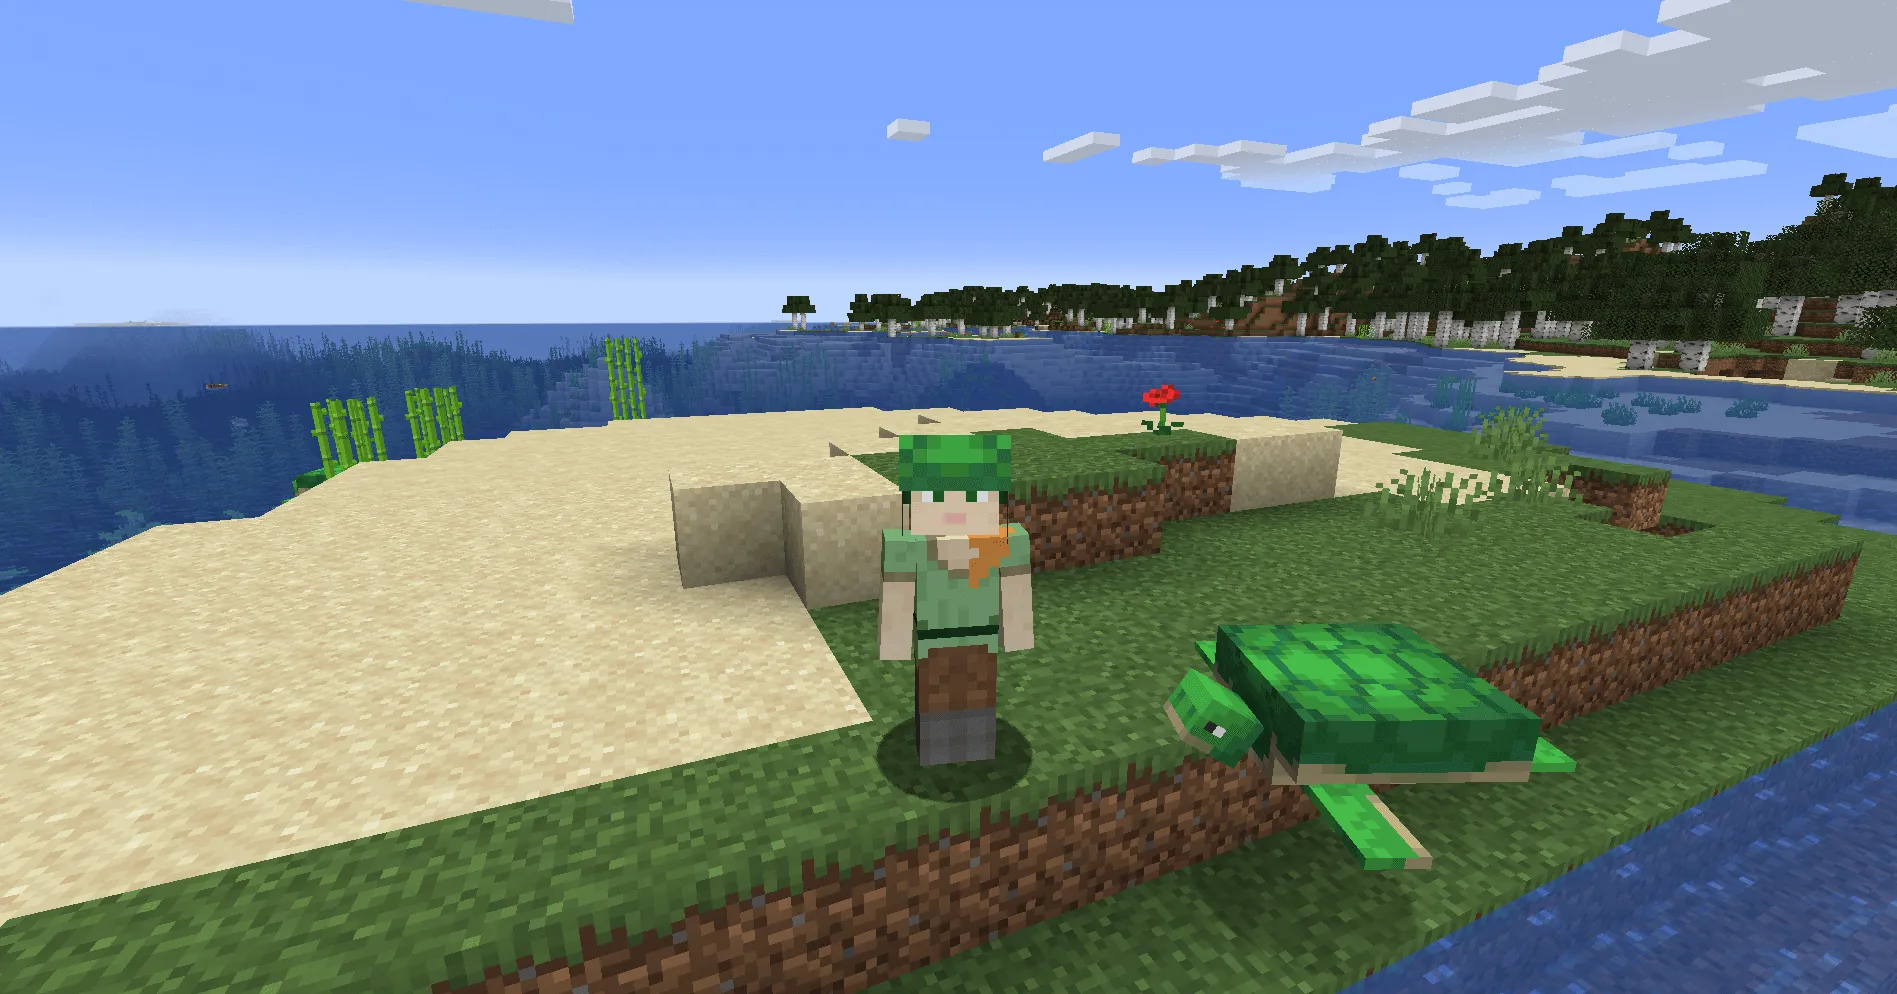 Why do my Turtles keep despawning in Minecraft?